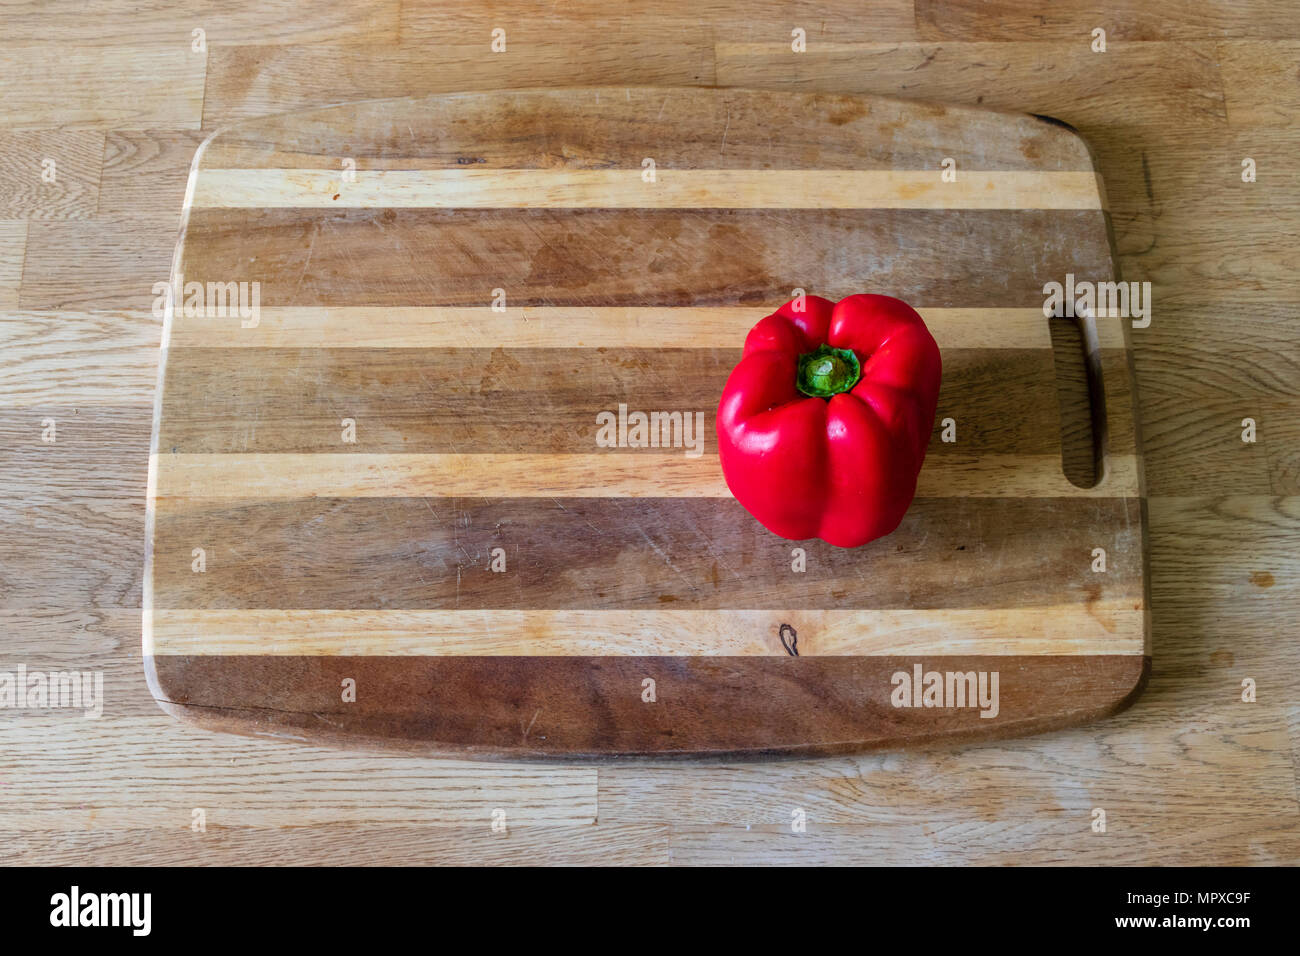 A red pepper on a chopping board Stock Photo